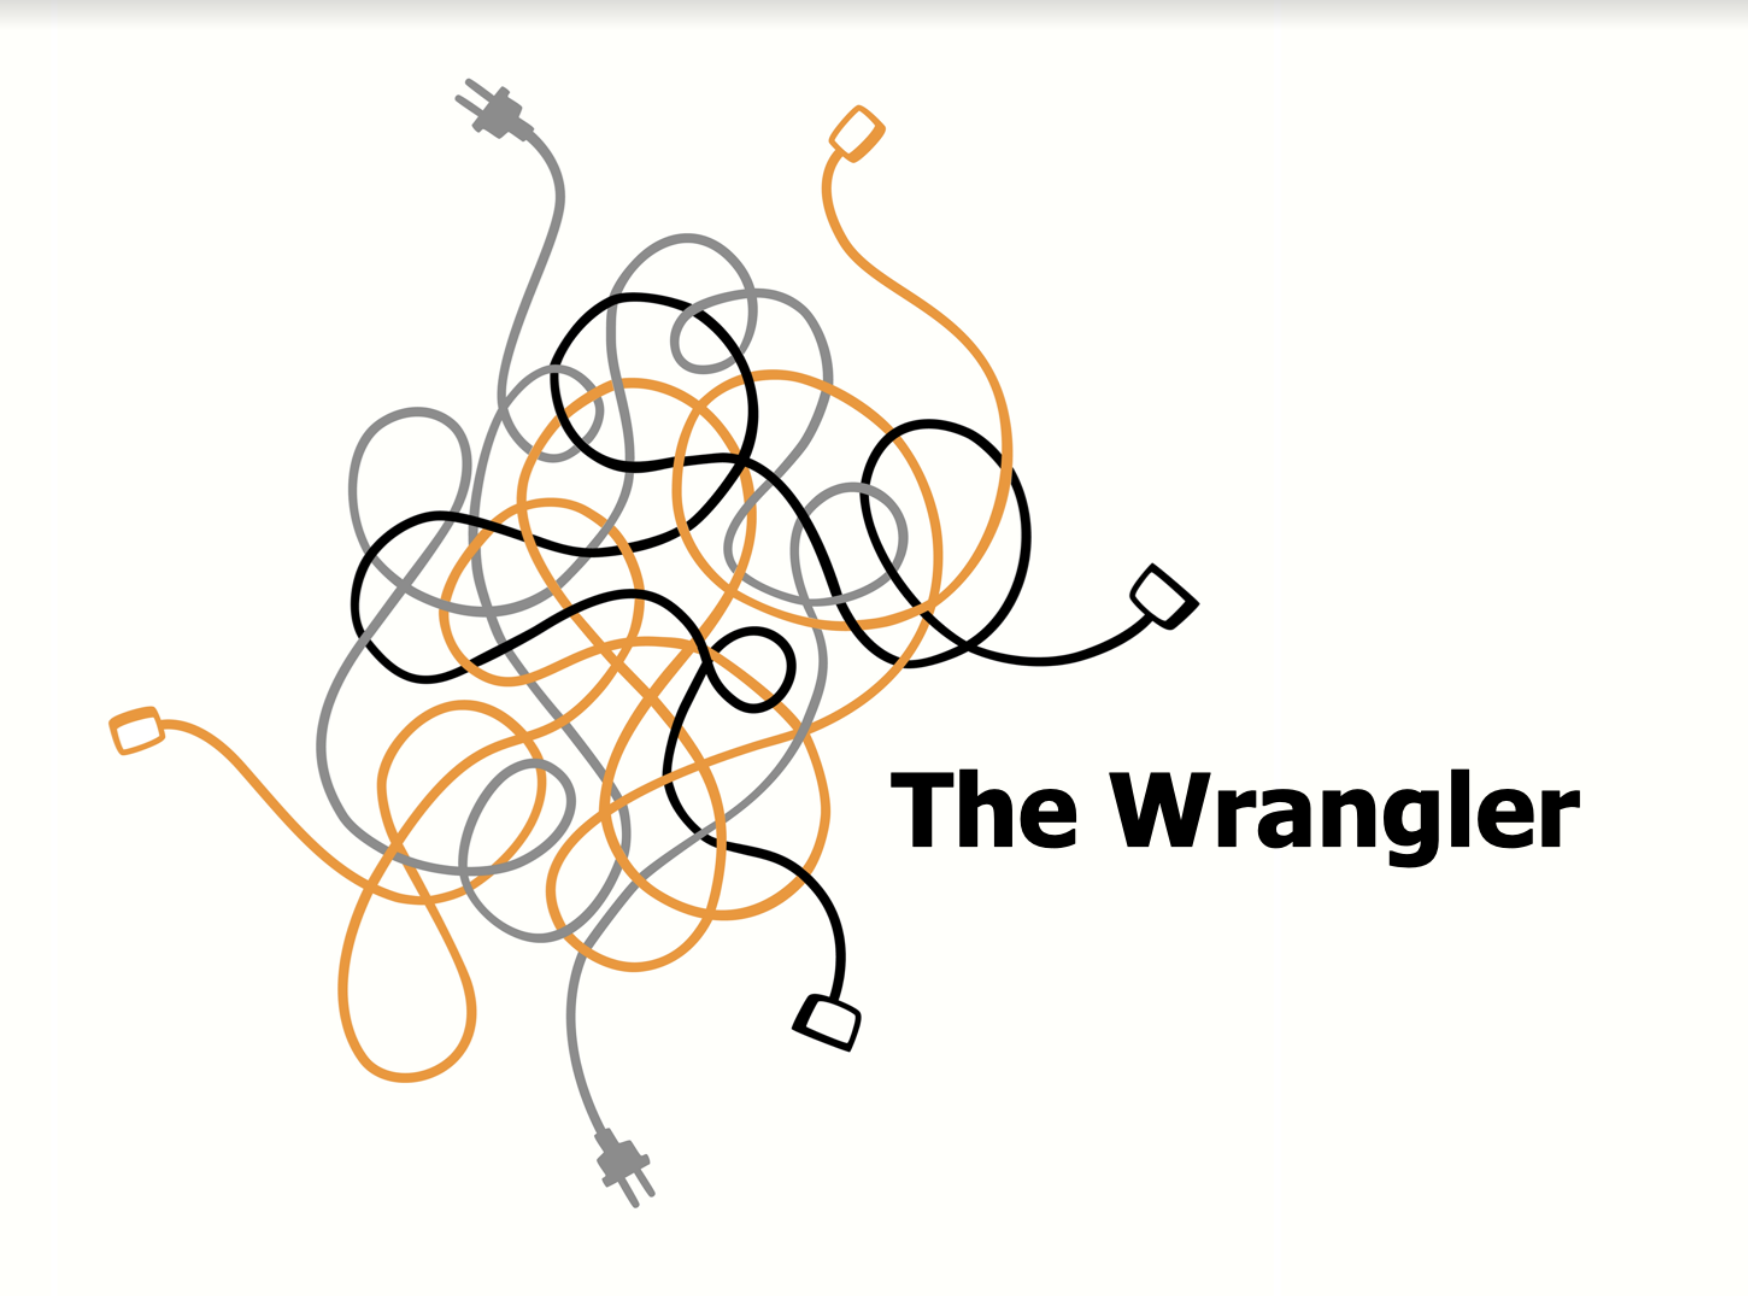 The Wrangler workshop poster with electrical cords tangled up